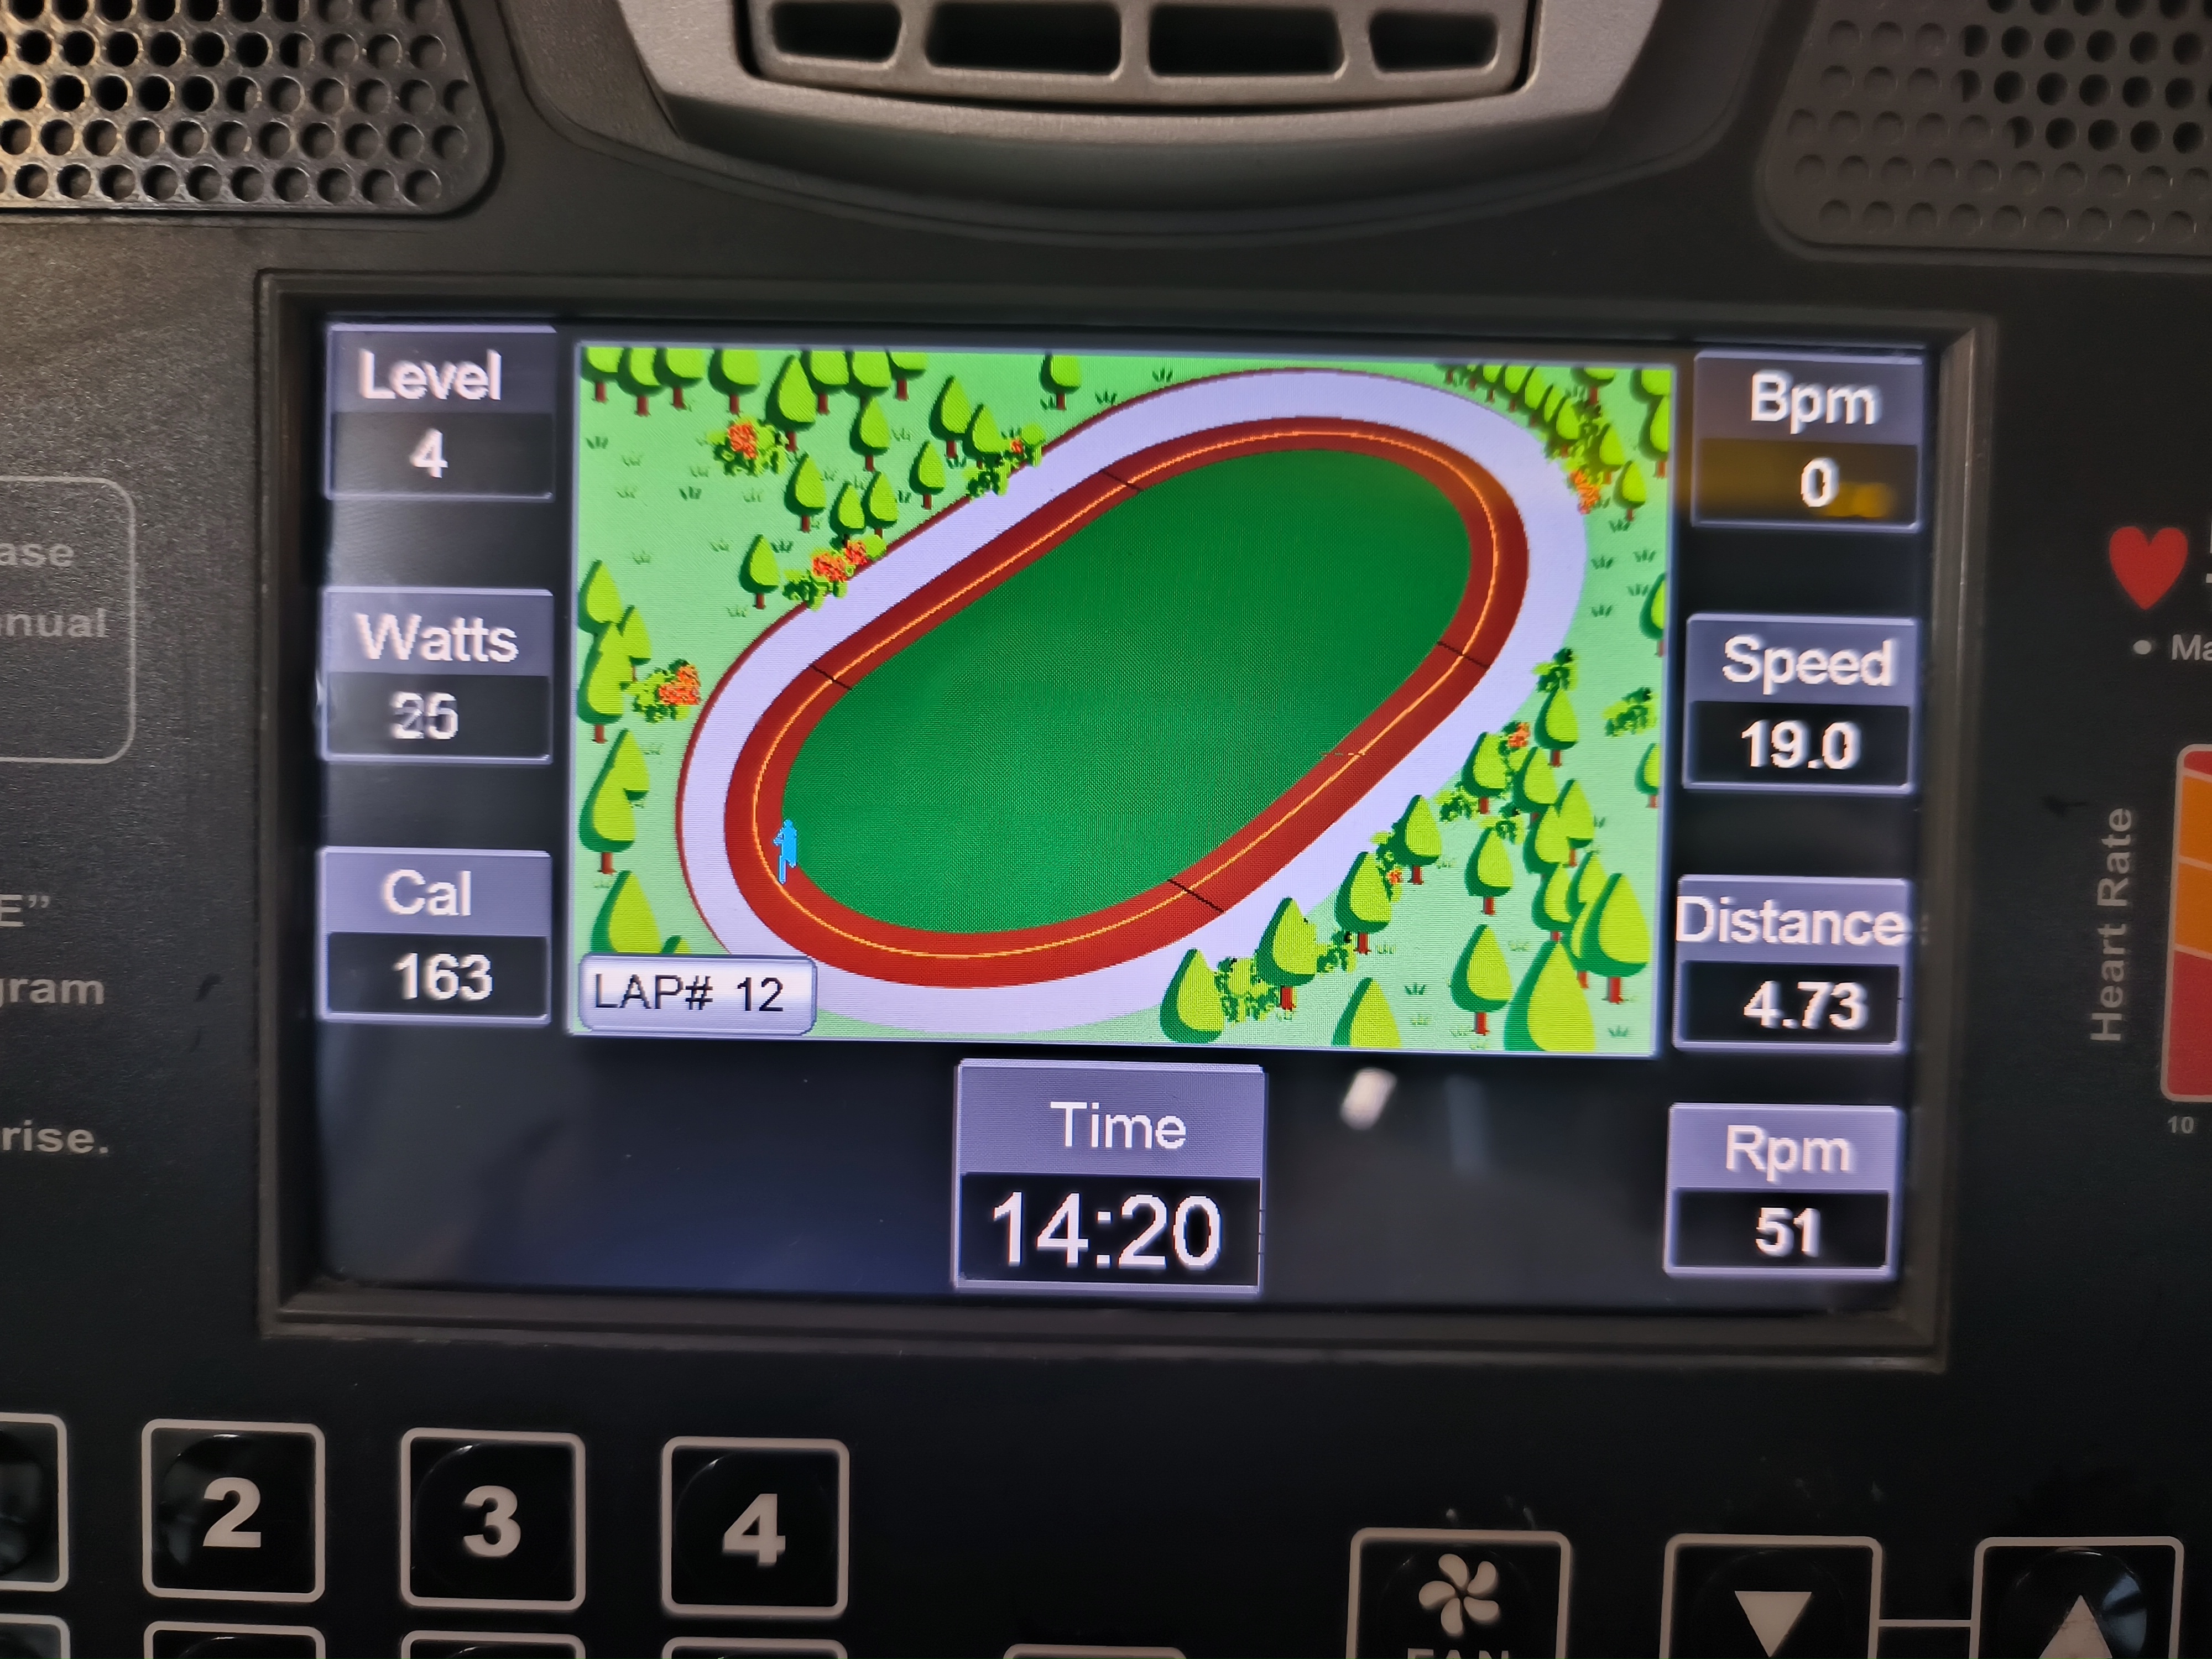 An image of a stationary cycling machine's interface, showing a virtual cyclist doing laps around a track.